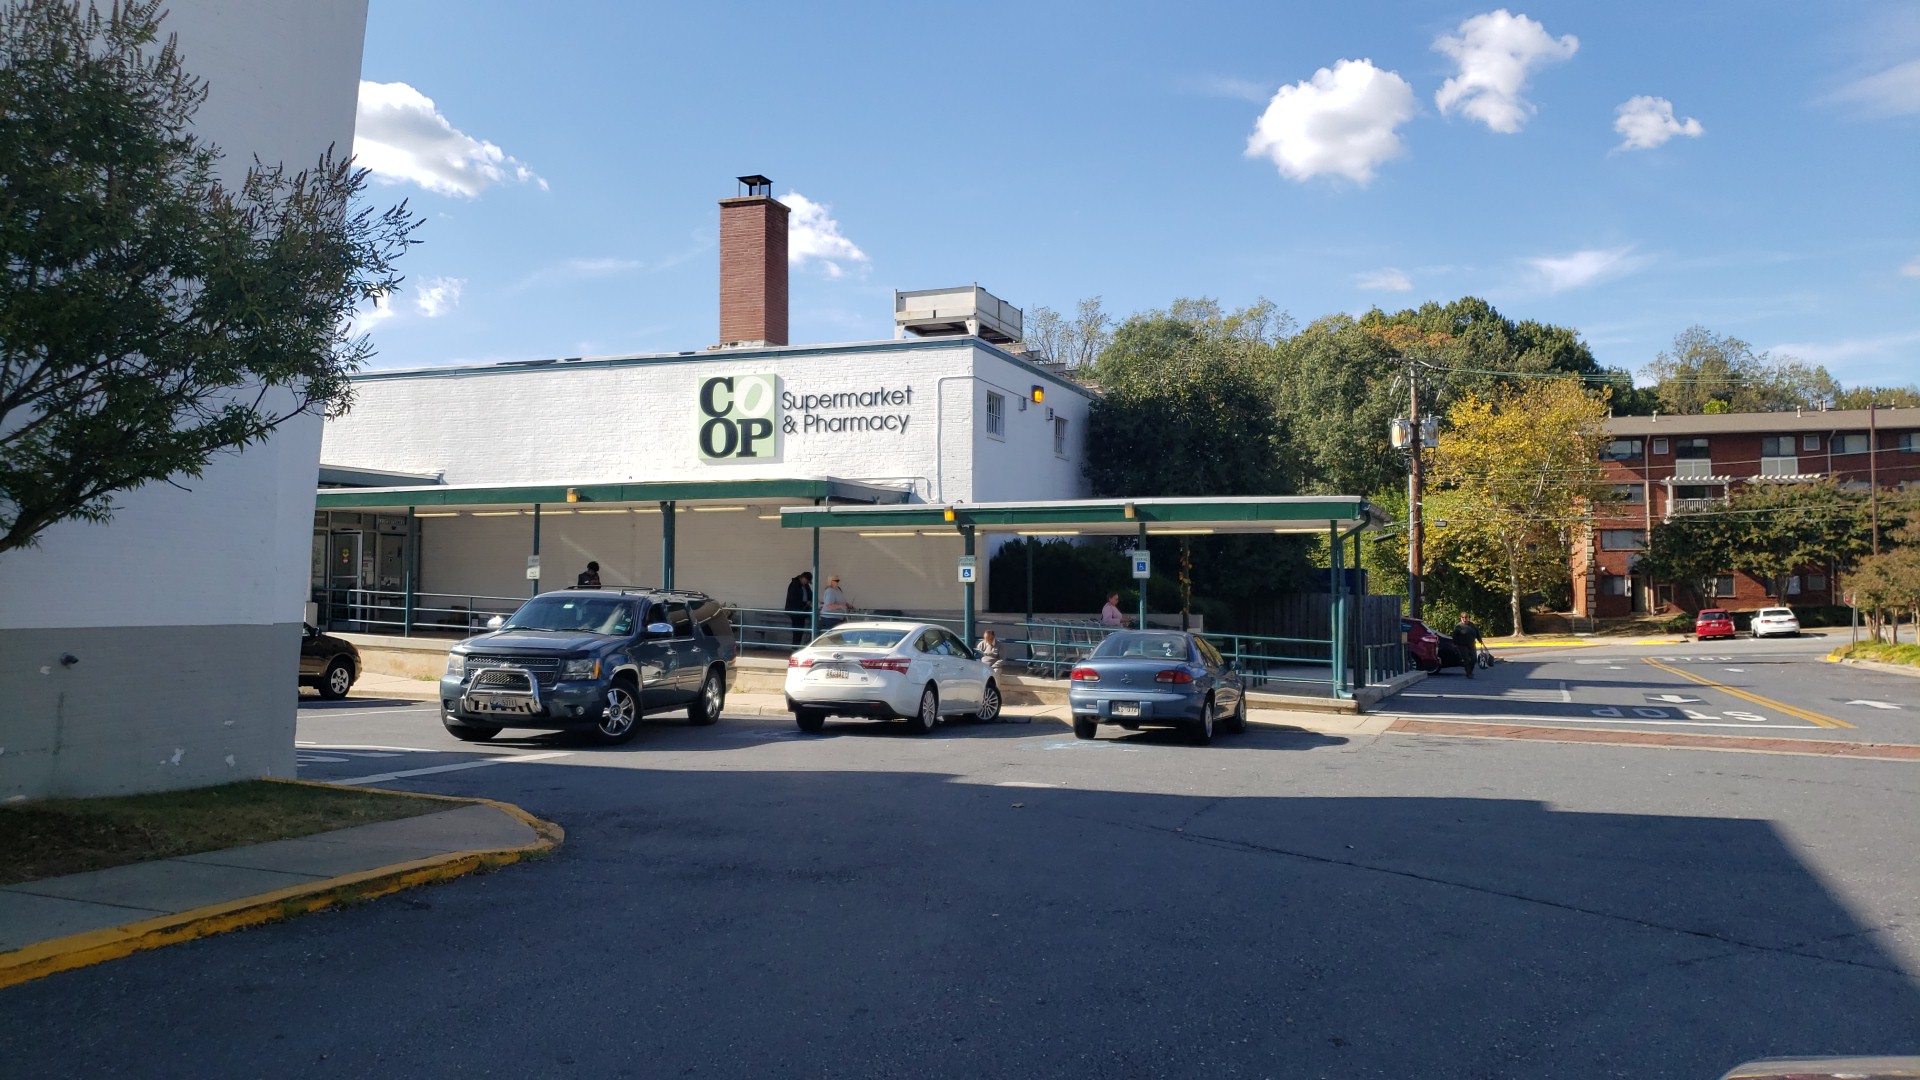 Greenbelt Co-op Supermarket and Pharmacy